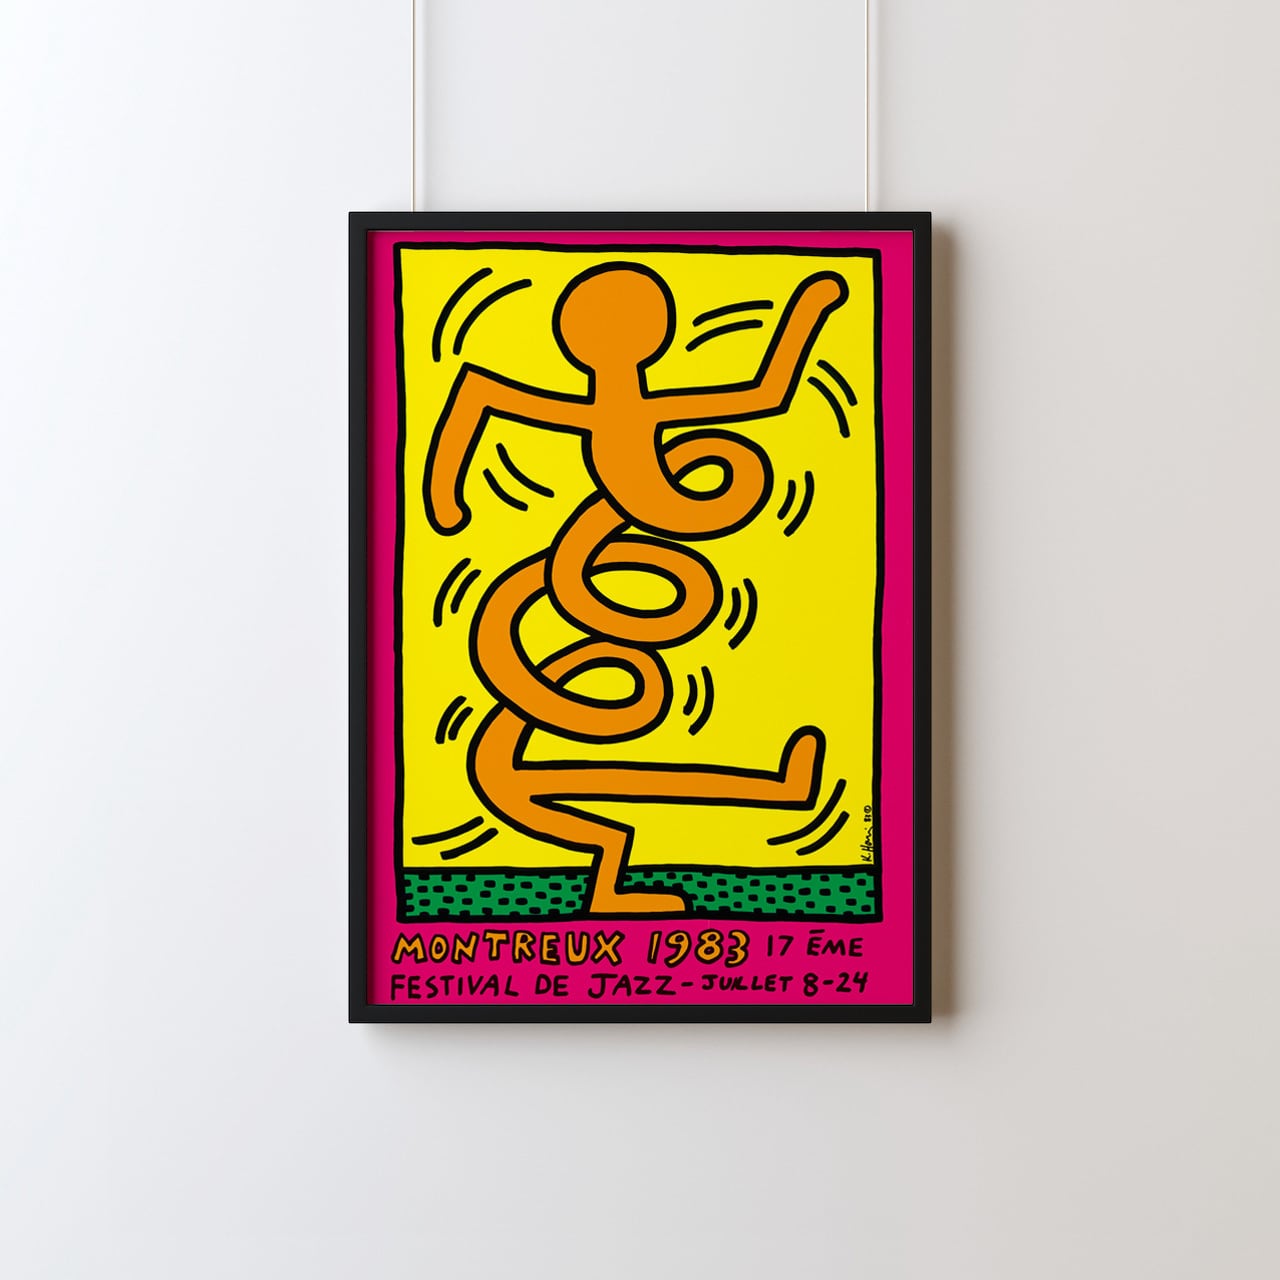 Keith Haring "Montreux Jazz Festival 1983" PINK